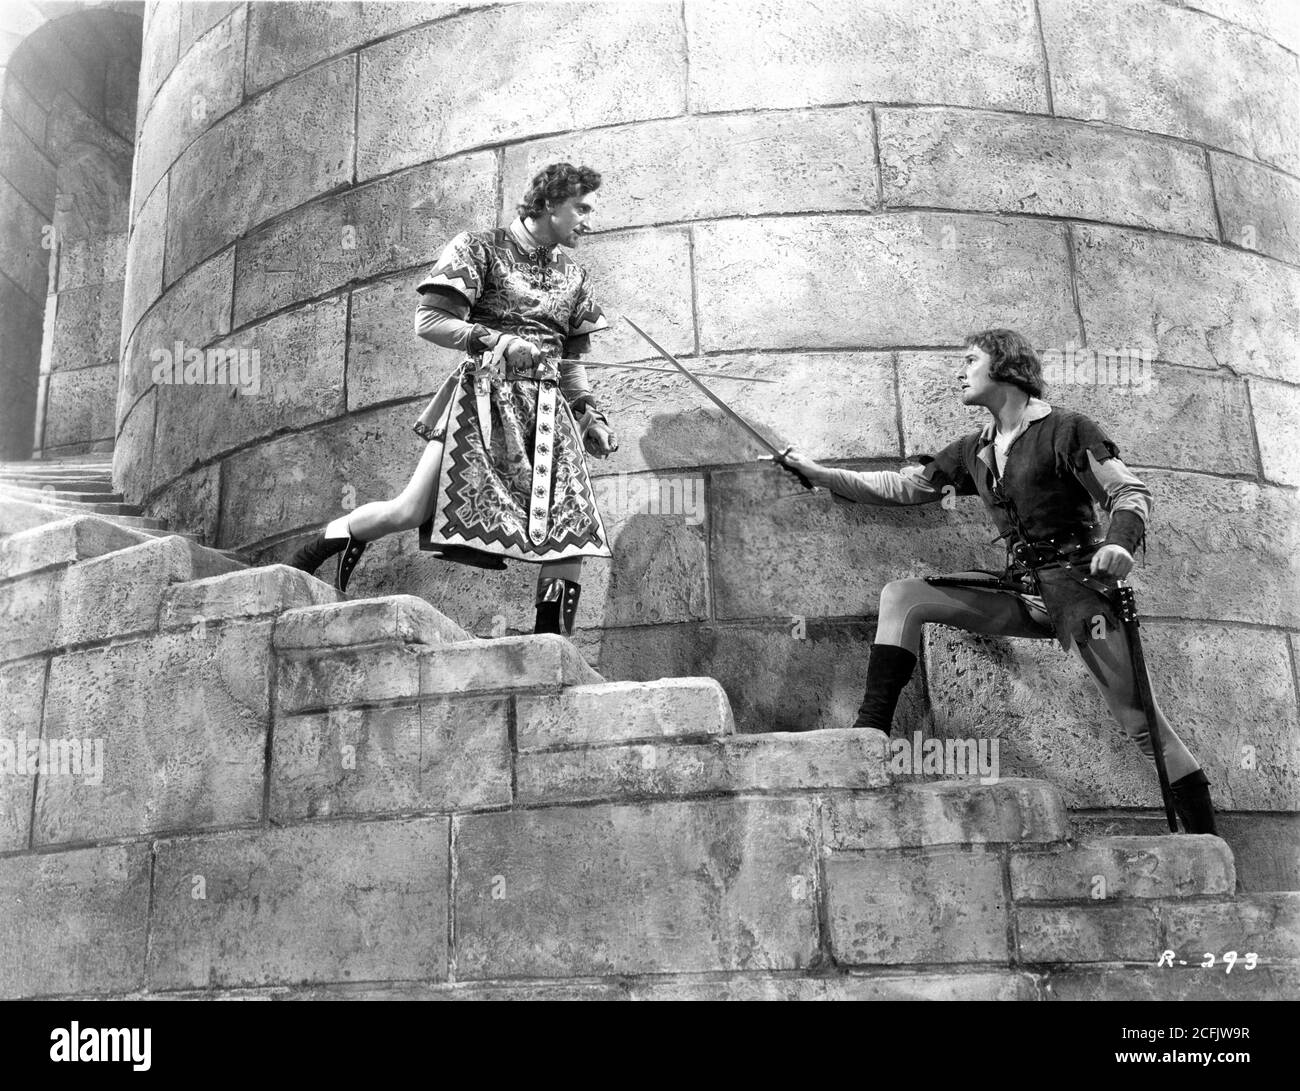 BASIL RATHBONE and ERROL FLYNN in climactic duel in THE ADVENTURES OF ROBIN HOOD 1938 directors MICHAEL CURTIZ and WILLIAM KEIGHLEY music Erich Wolfgang Korngold Warner Bros. Stock Photo